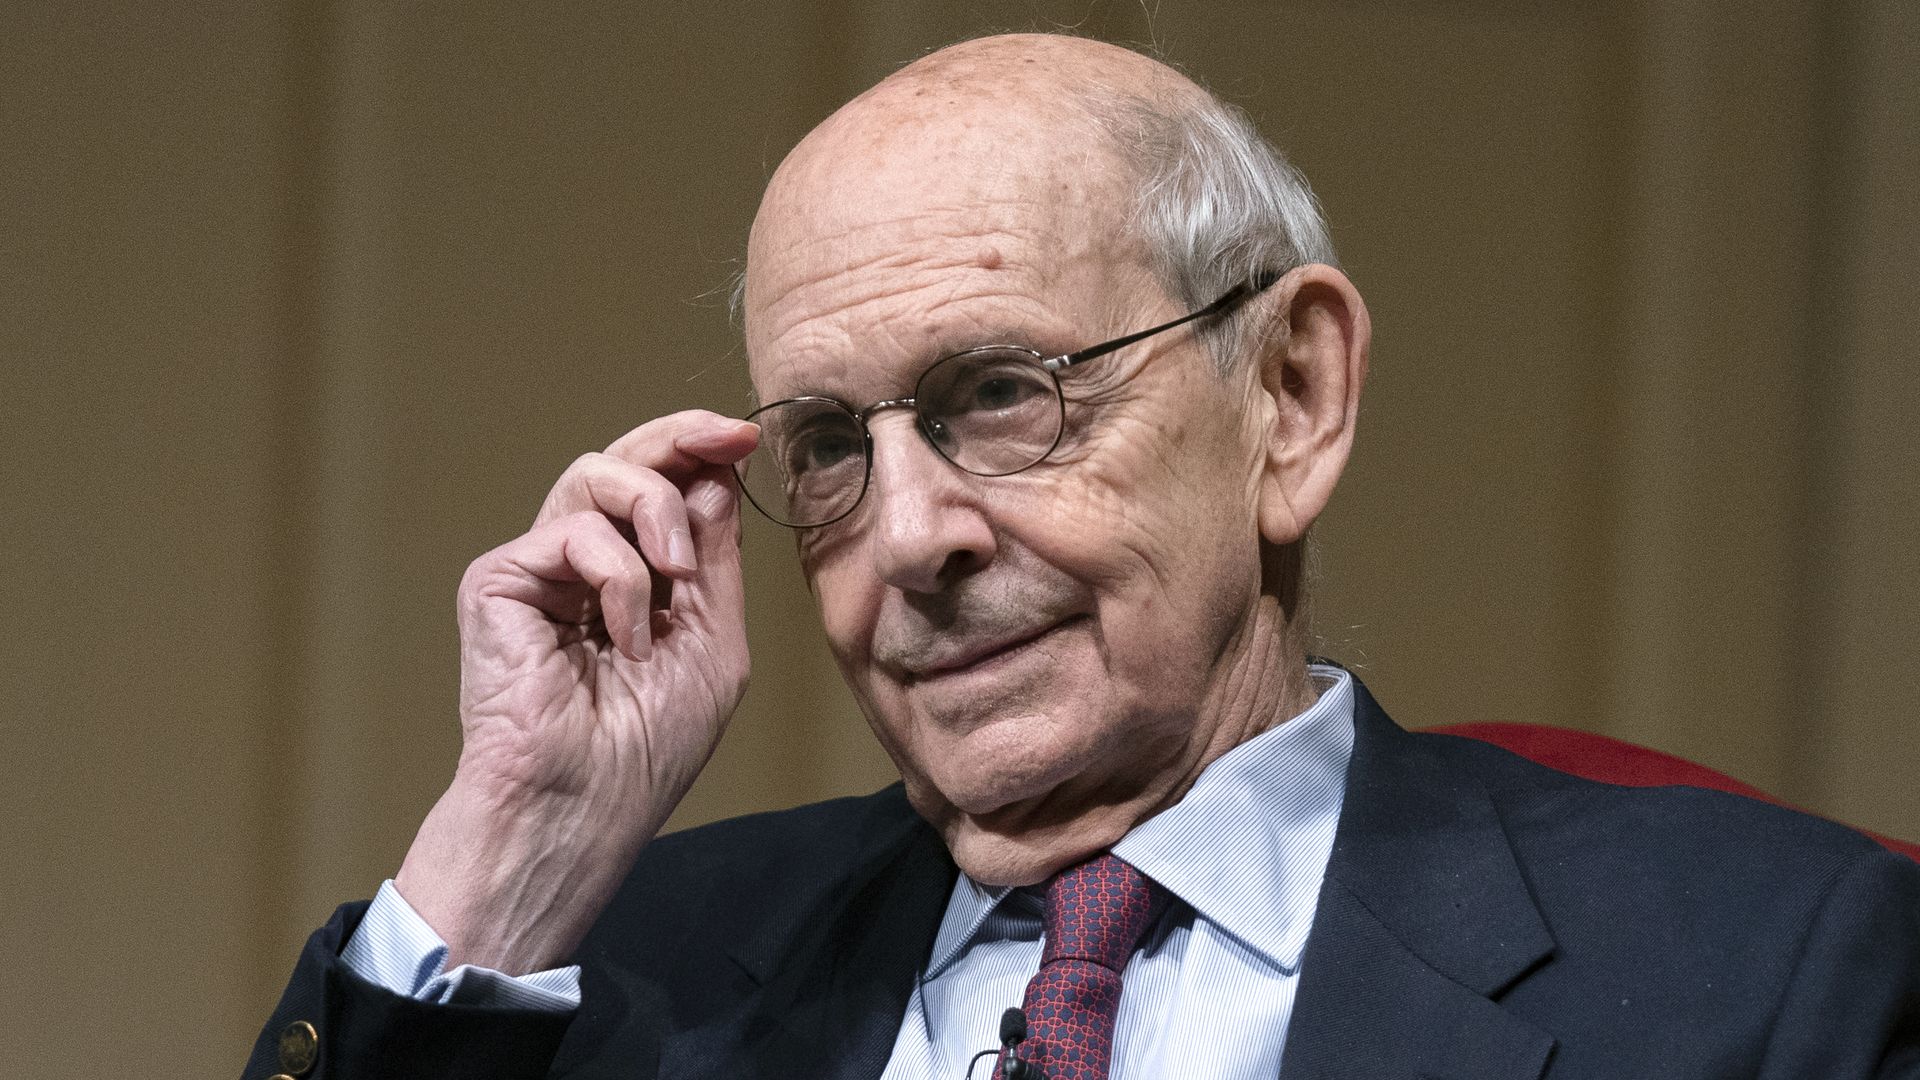 For the good of America, Justice Breyer must step down from the